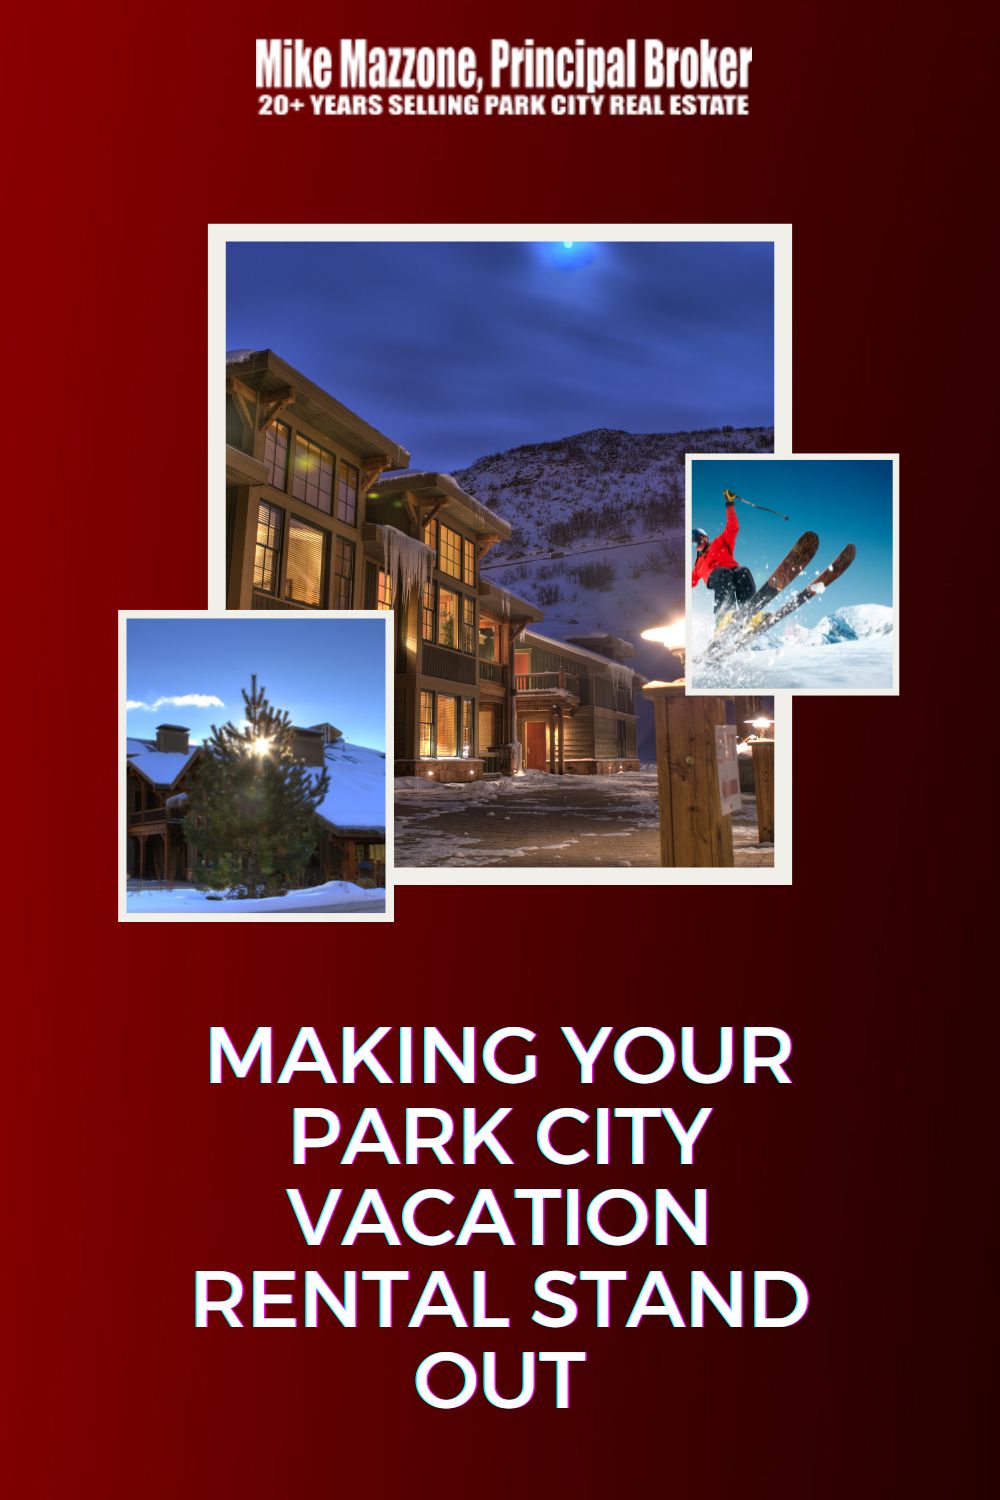 Making Your Park City Vacation Rental Stand Out